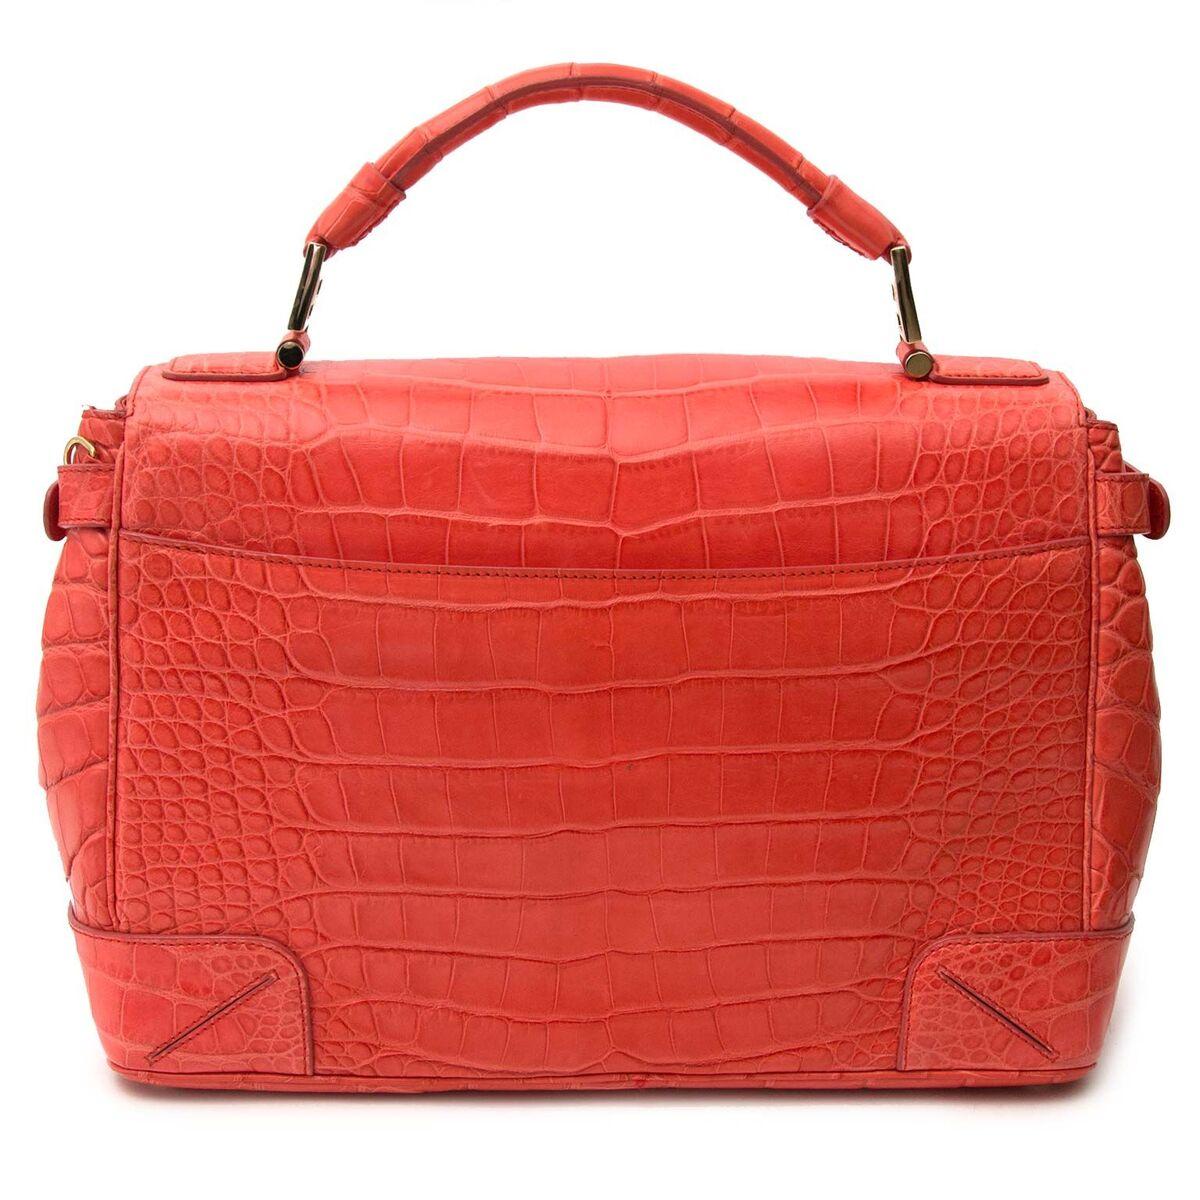 Excellent condition

Versace Orange Croco Flap Bag

Stand out from the crowd with this colourful Versace Croco bag.
Made out of smooth croco leather, this Versace is a very exclusive bag!
What makes this bag so special, is its Medusa logo and its